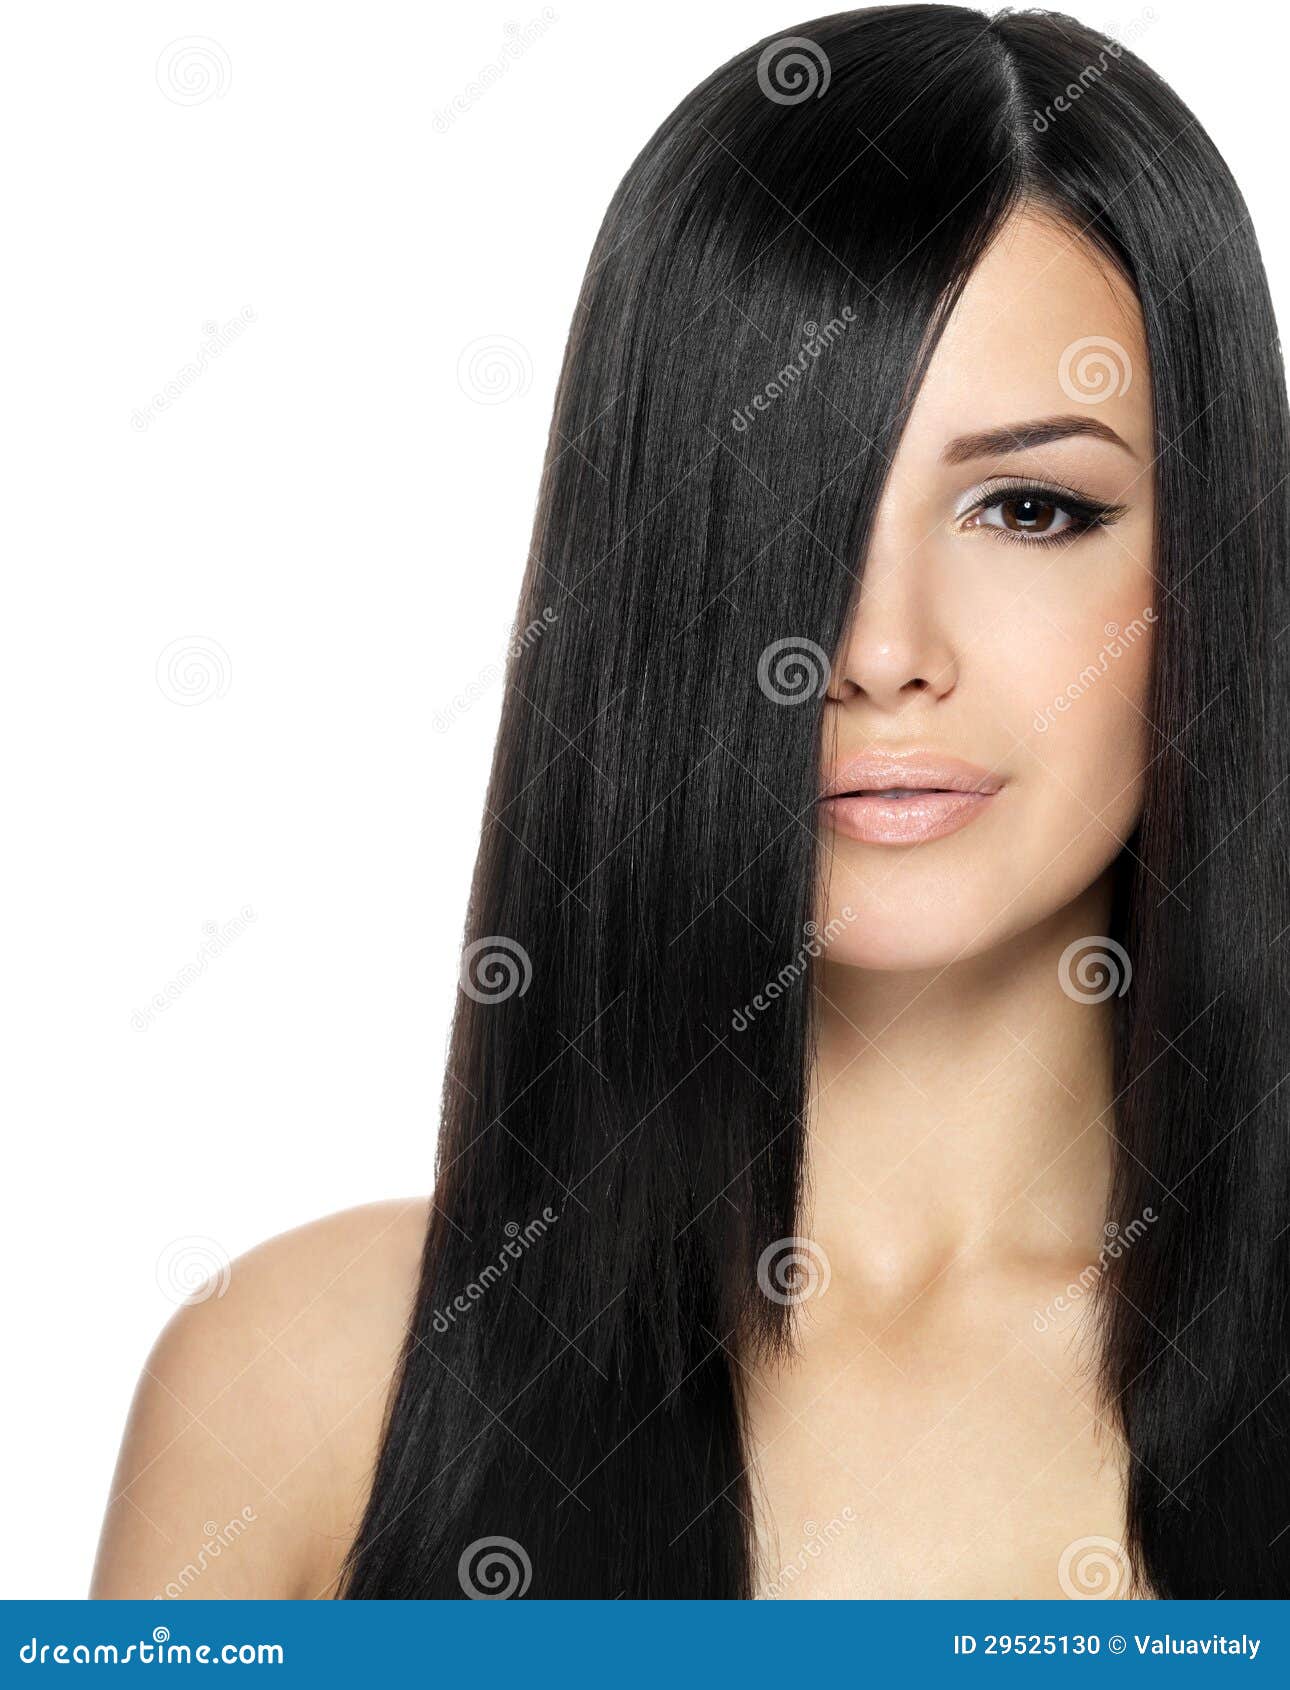 Woman with Long Straight Hair Stock Photo - Image of model, girl: 29525130